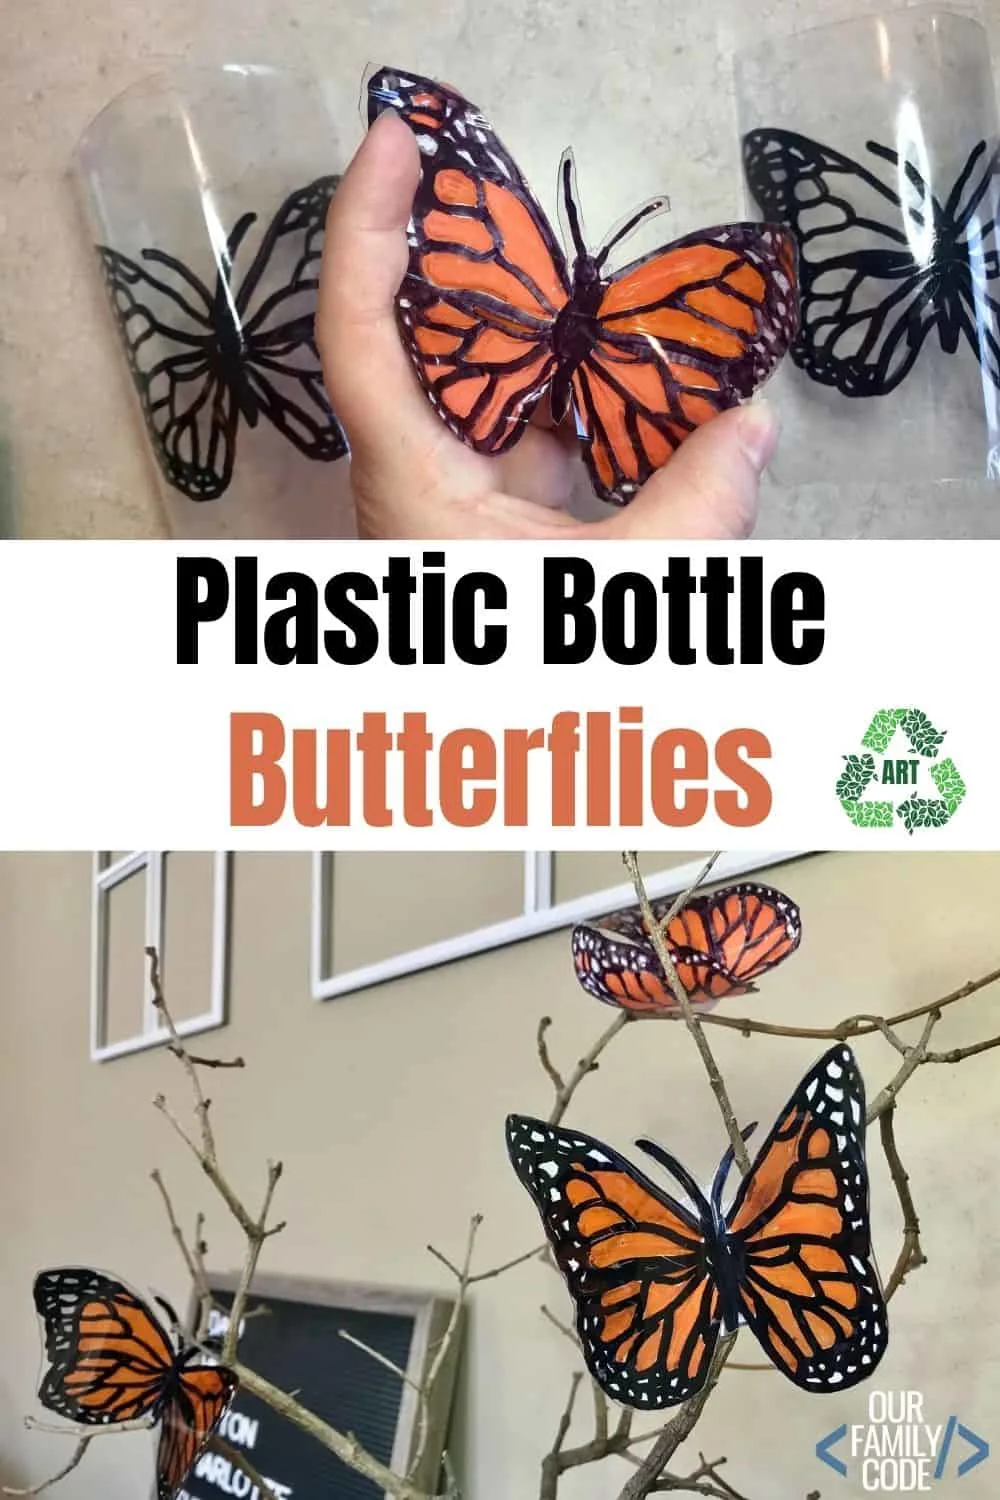 A picture of plastic bottle butterflies recycled art activity image.